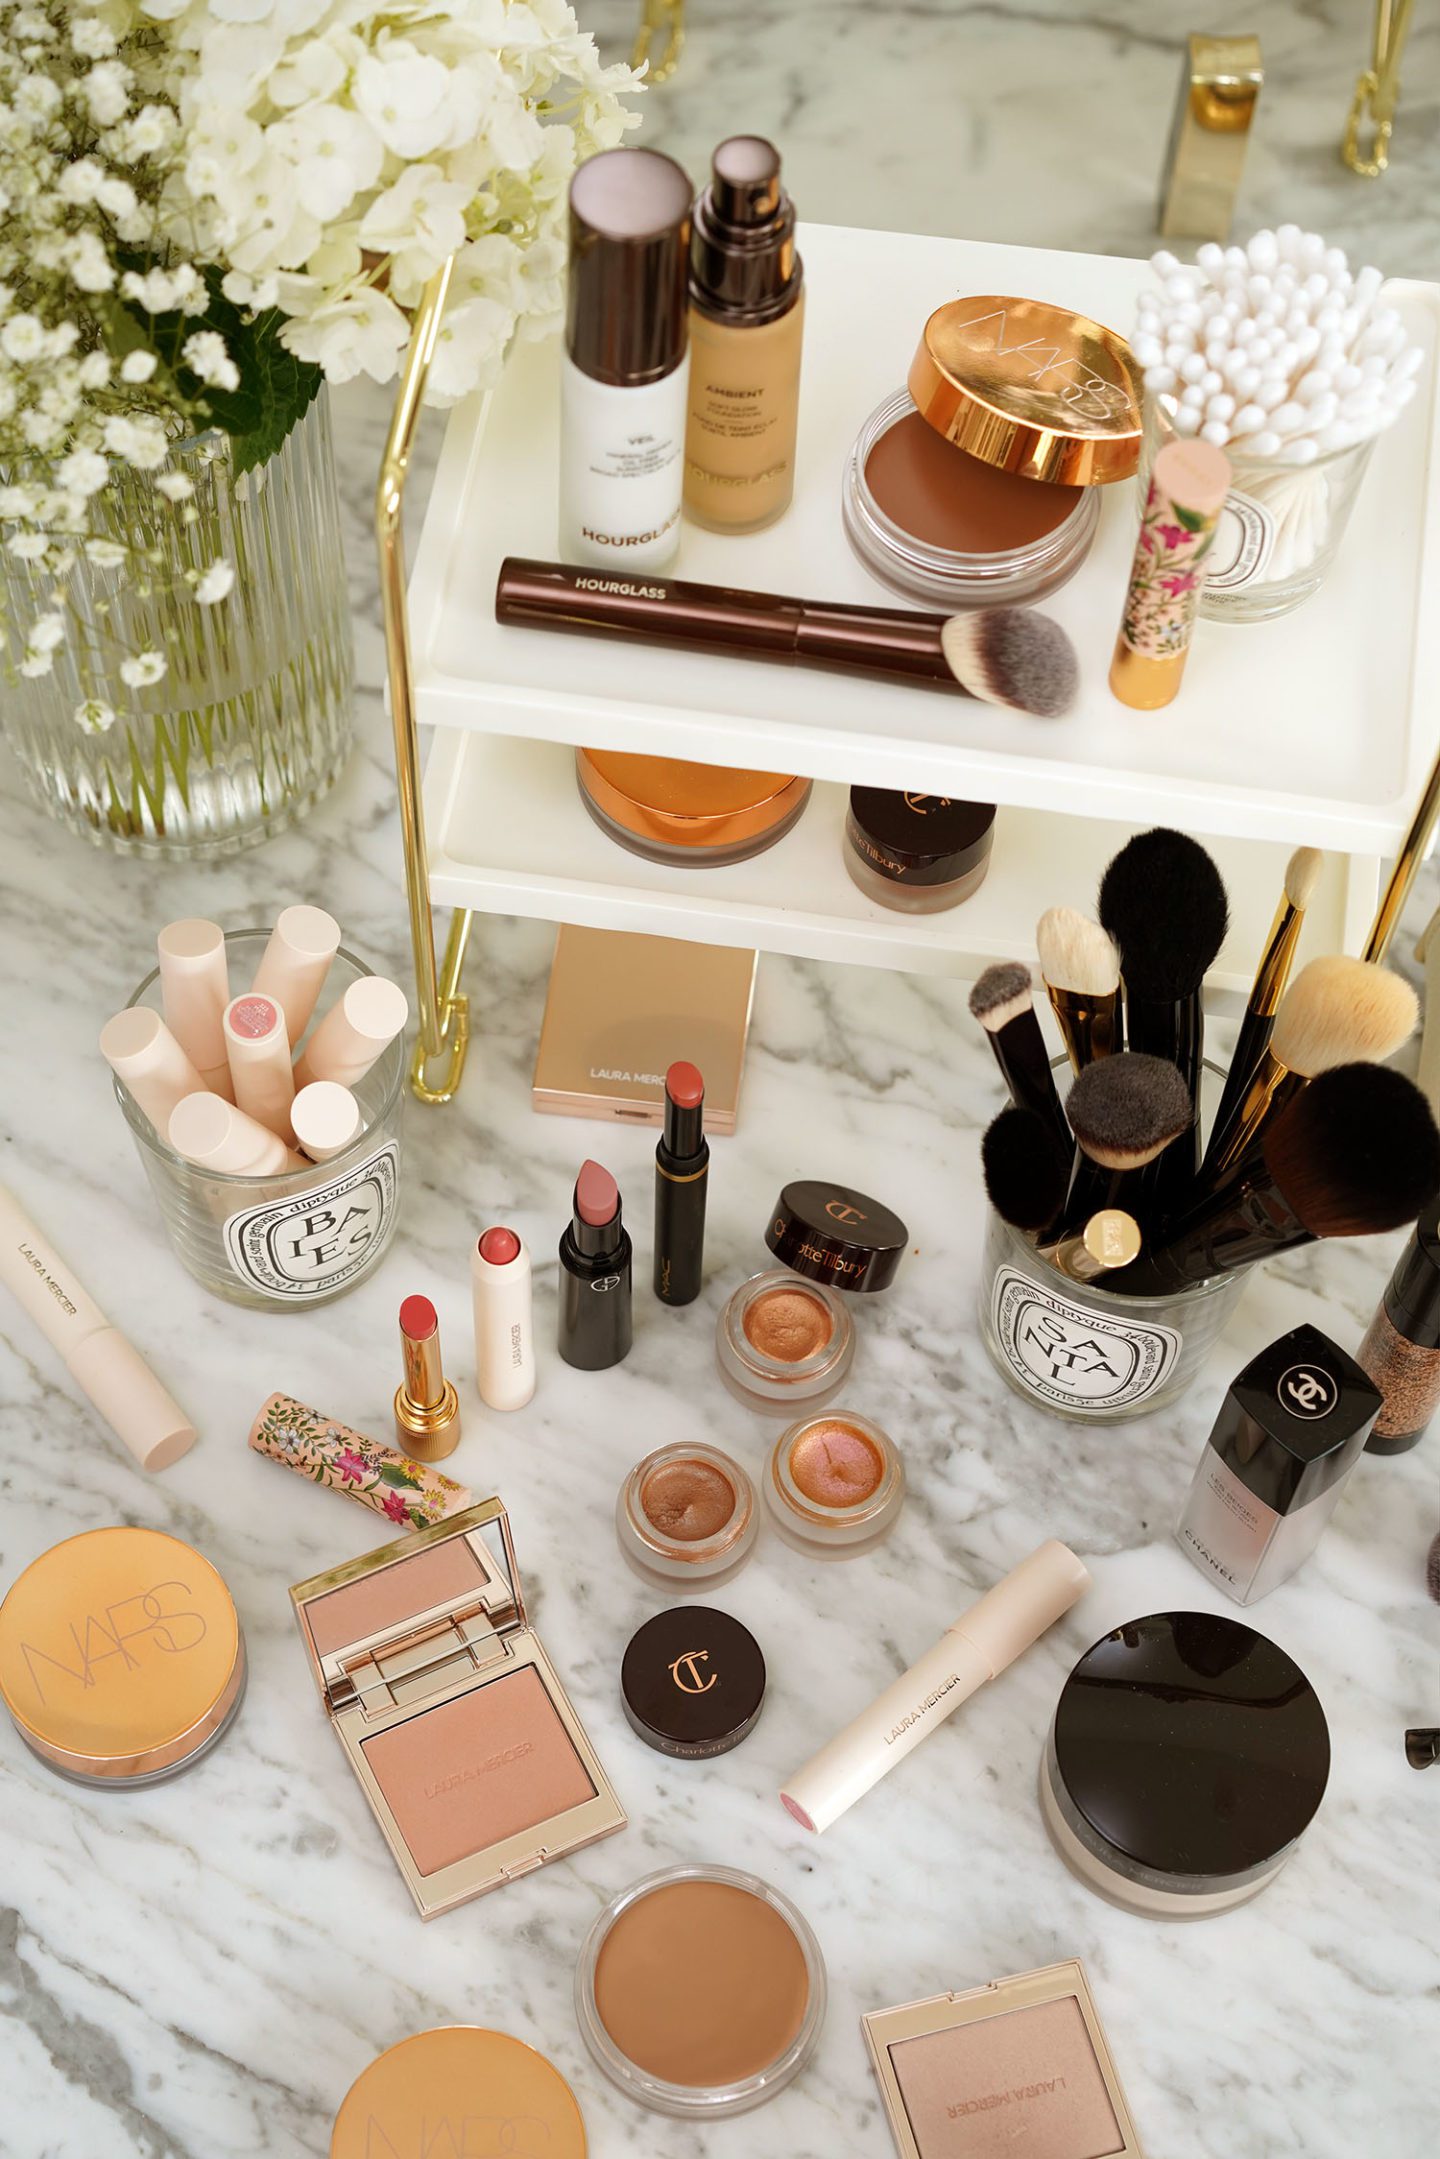 New Beauty Launches from Nordstrom